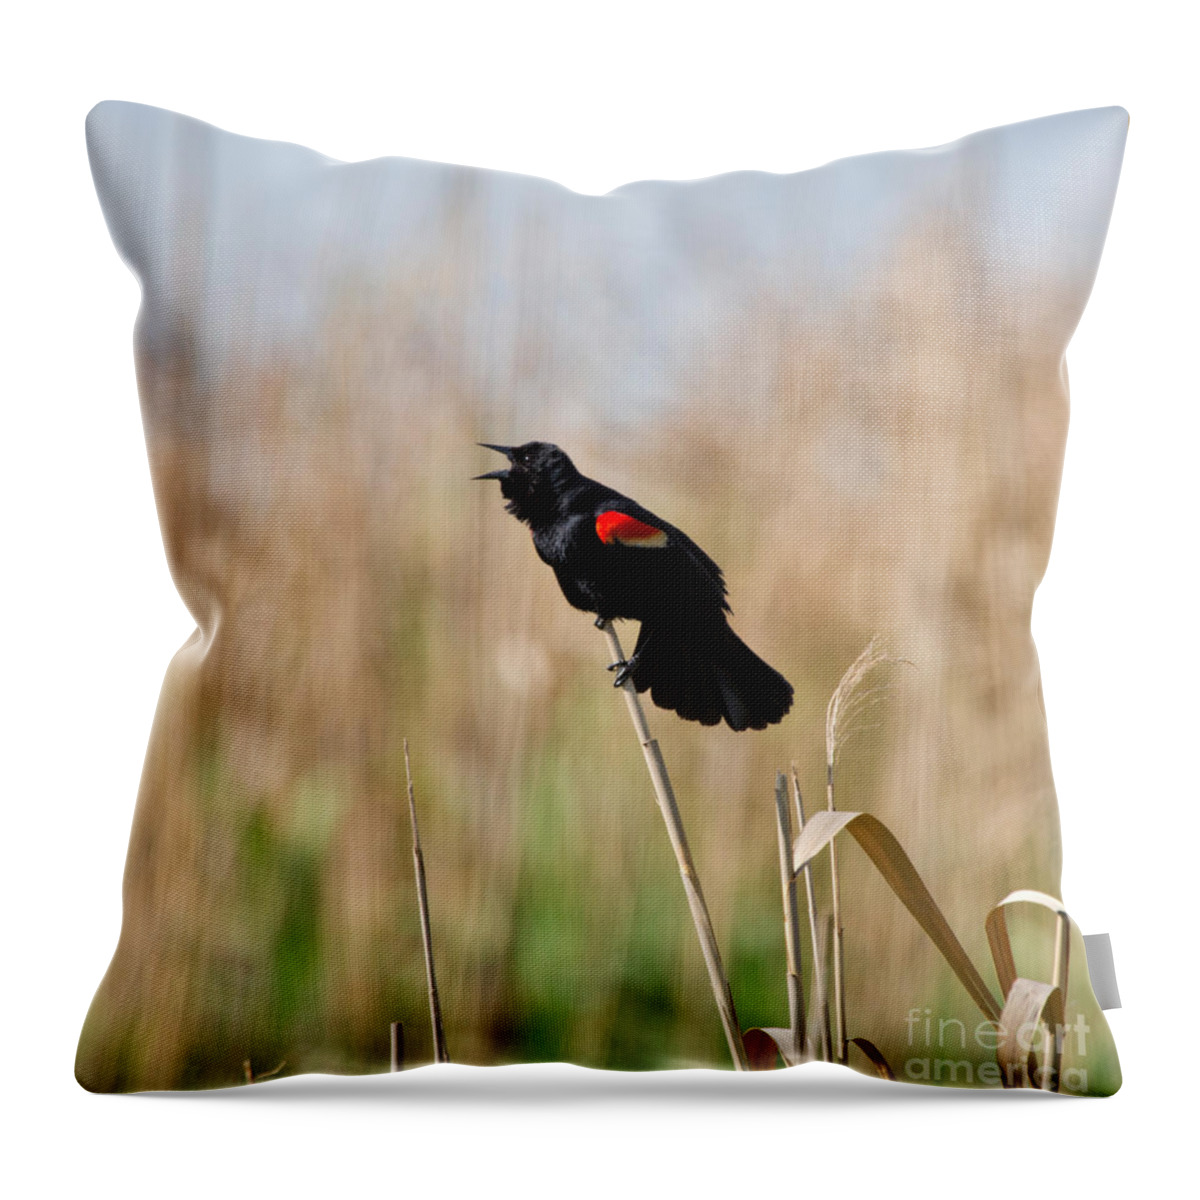 Red Winged Blackbird Throw Pillow featuring the photograph Red-winged Blackbird by Louise Heusinkveld